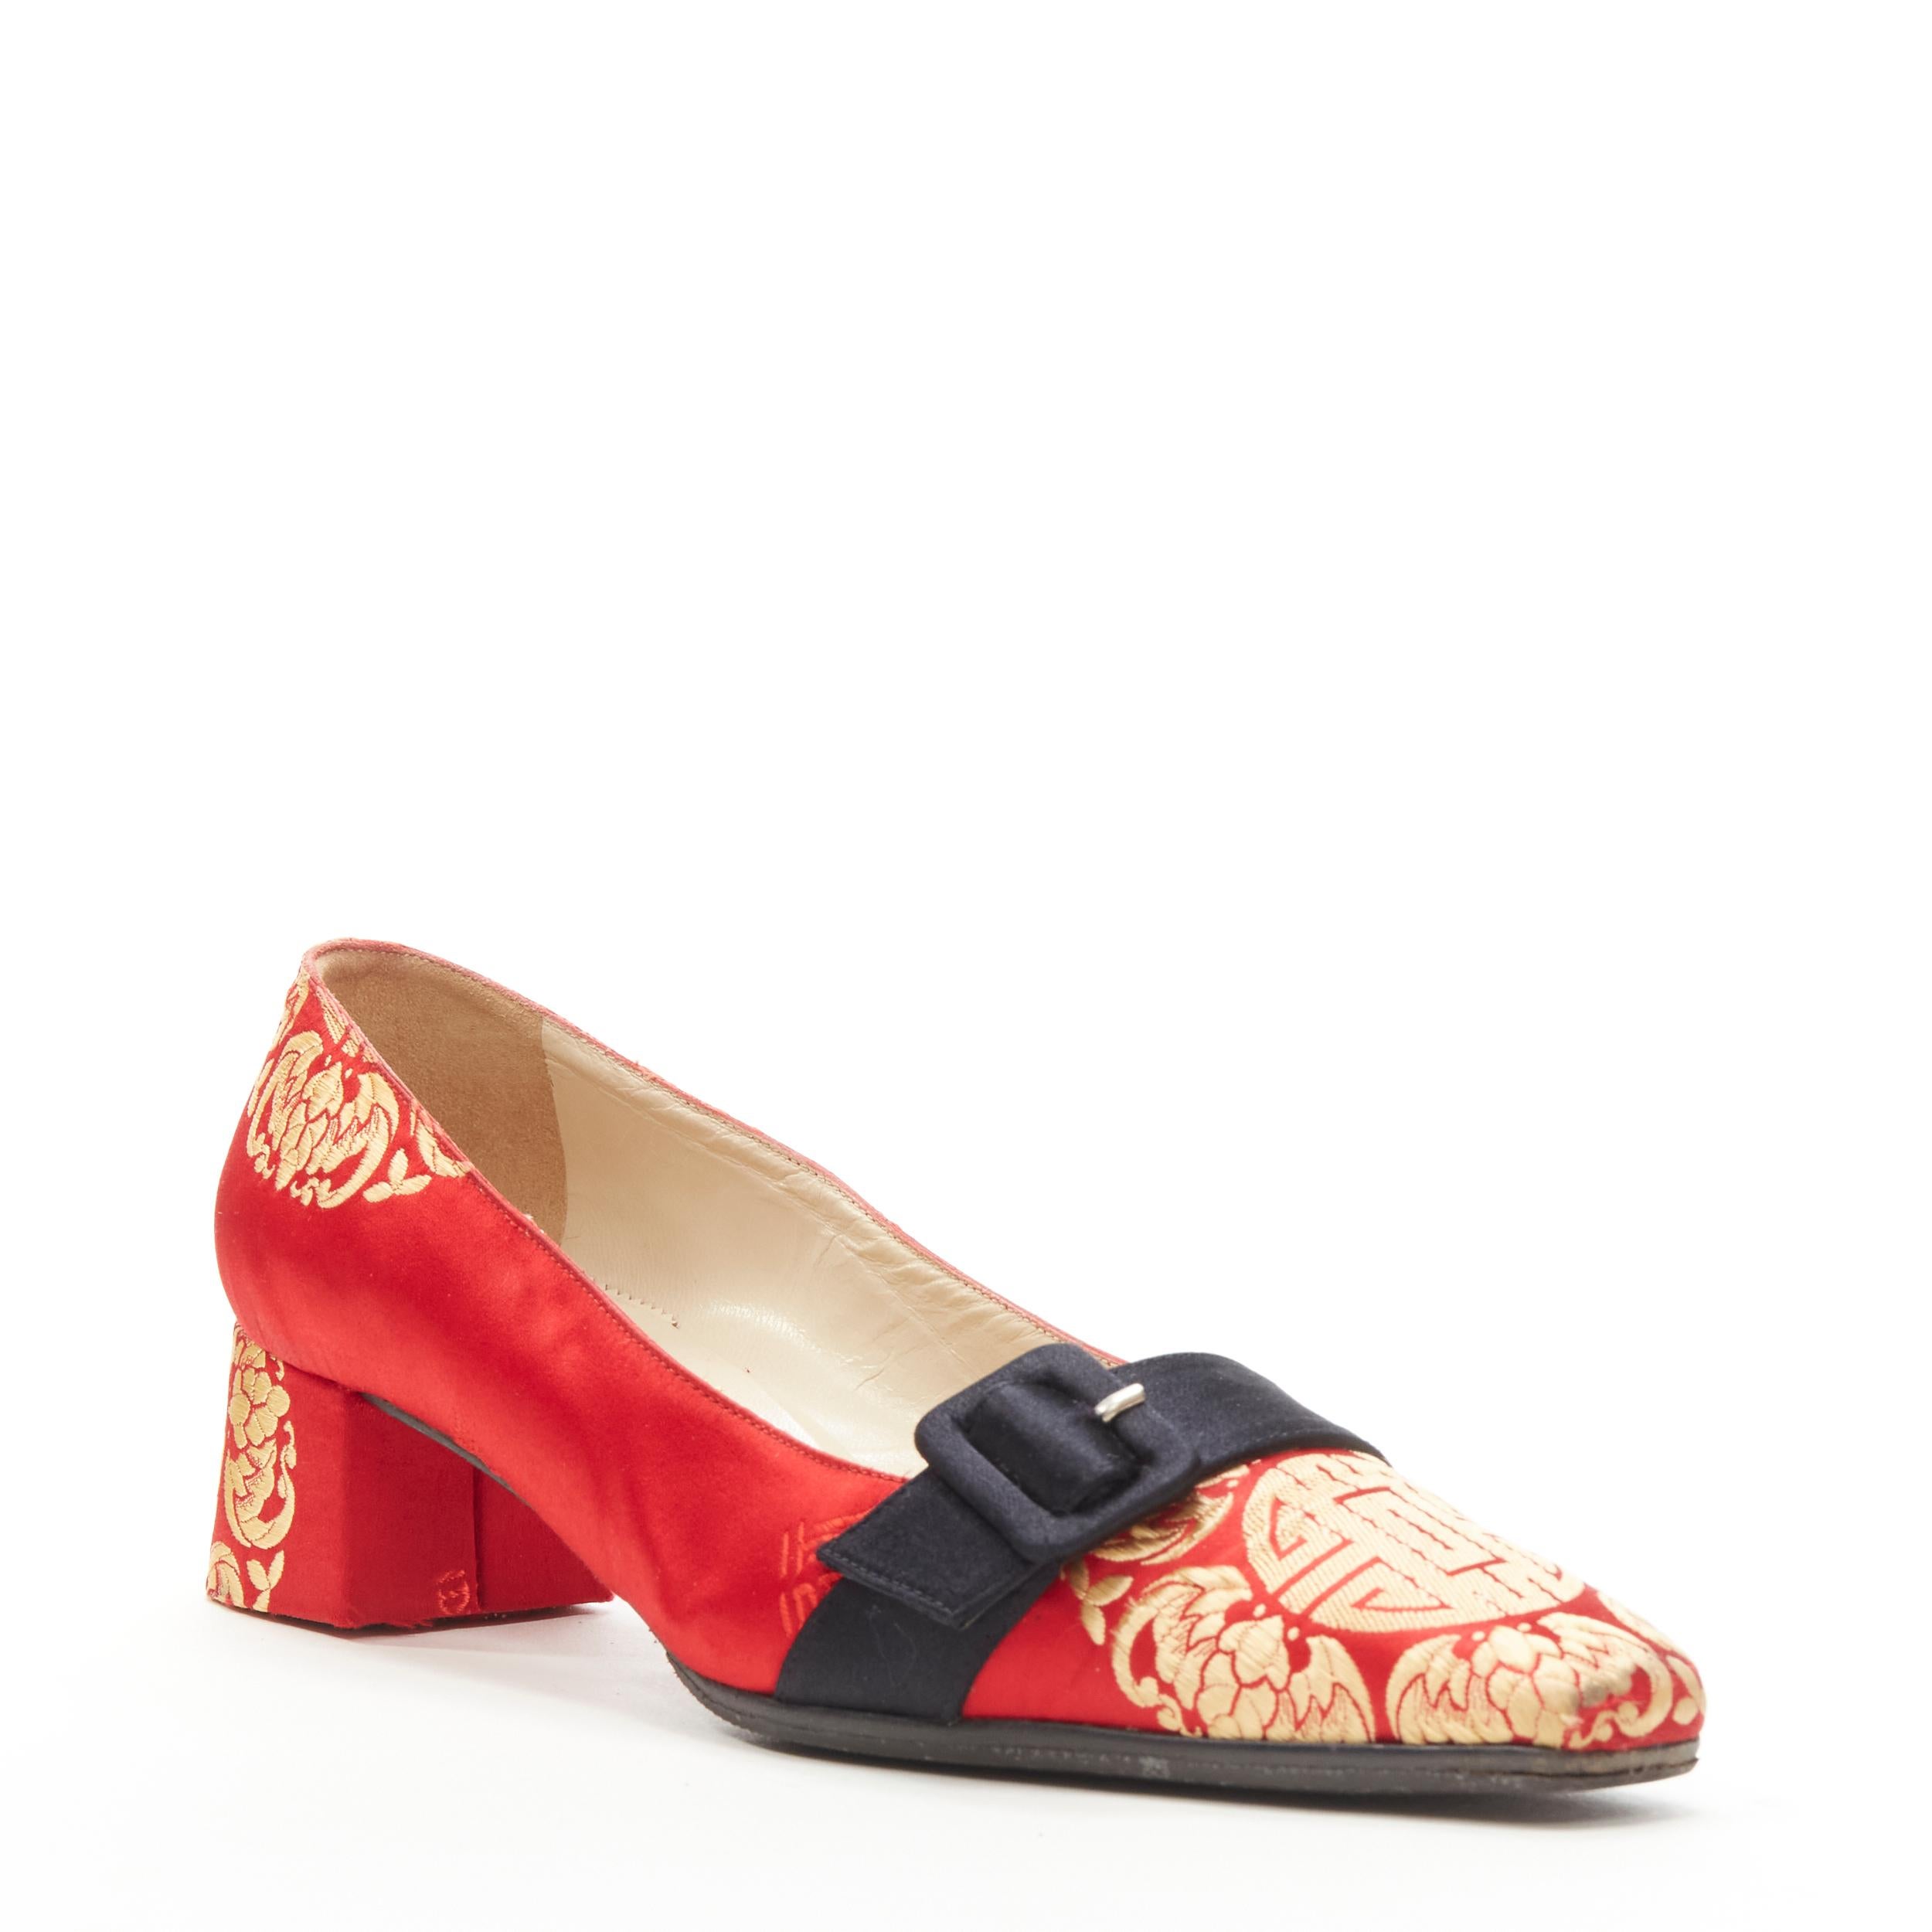 rare CHRISTIAN LOUBOUTIN red gold oriental chinoiserie block heel pump EU36.5 
Reference: ANWU/A00171 
Brand: Christian Louboutin 
Material: Fabric 
Color: Red 
Pattern: Oriental 
Extra Detail: Please note this model is from before 2010 and the sole